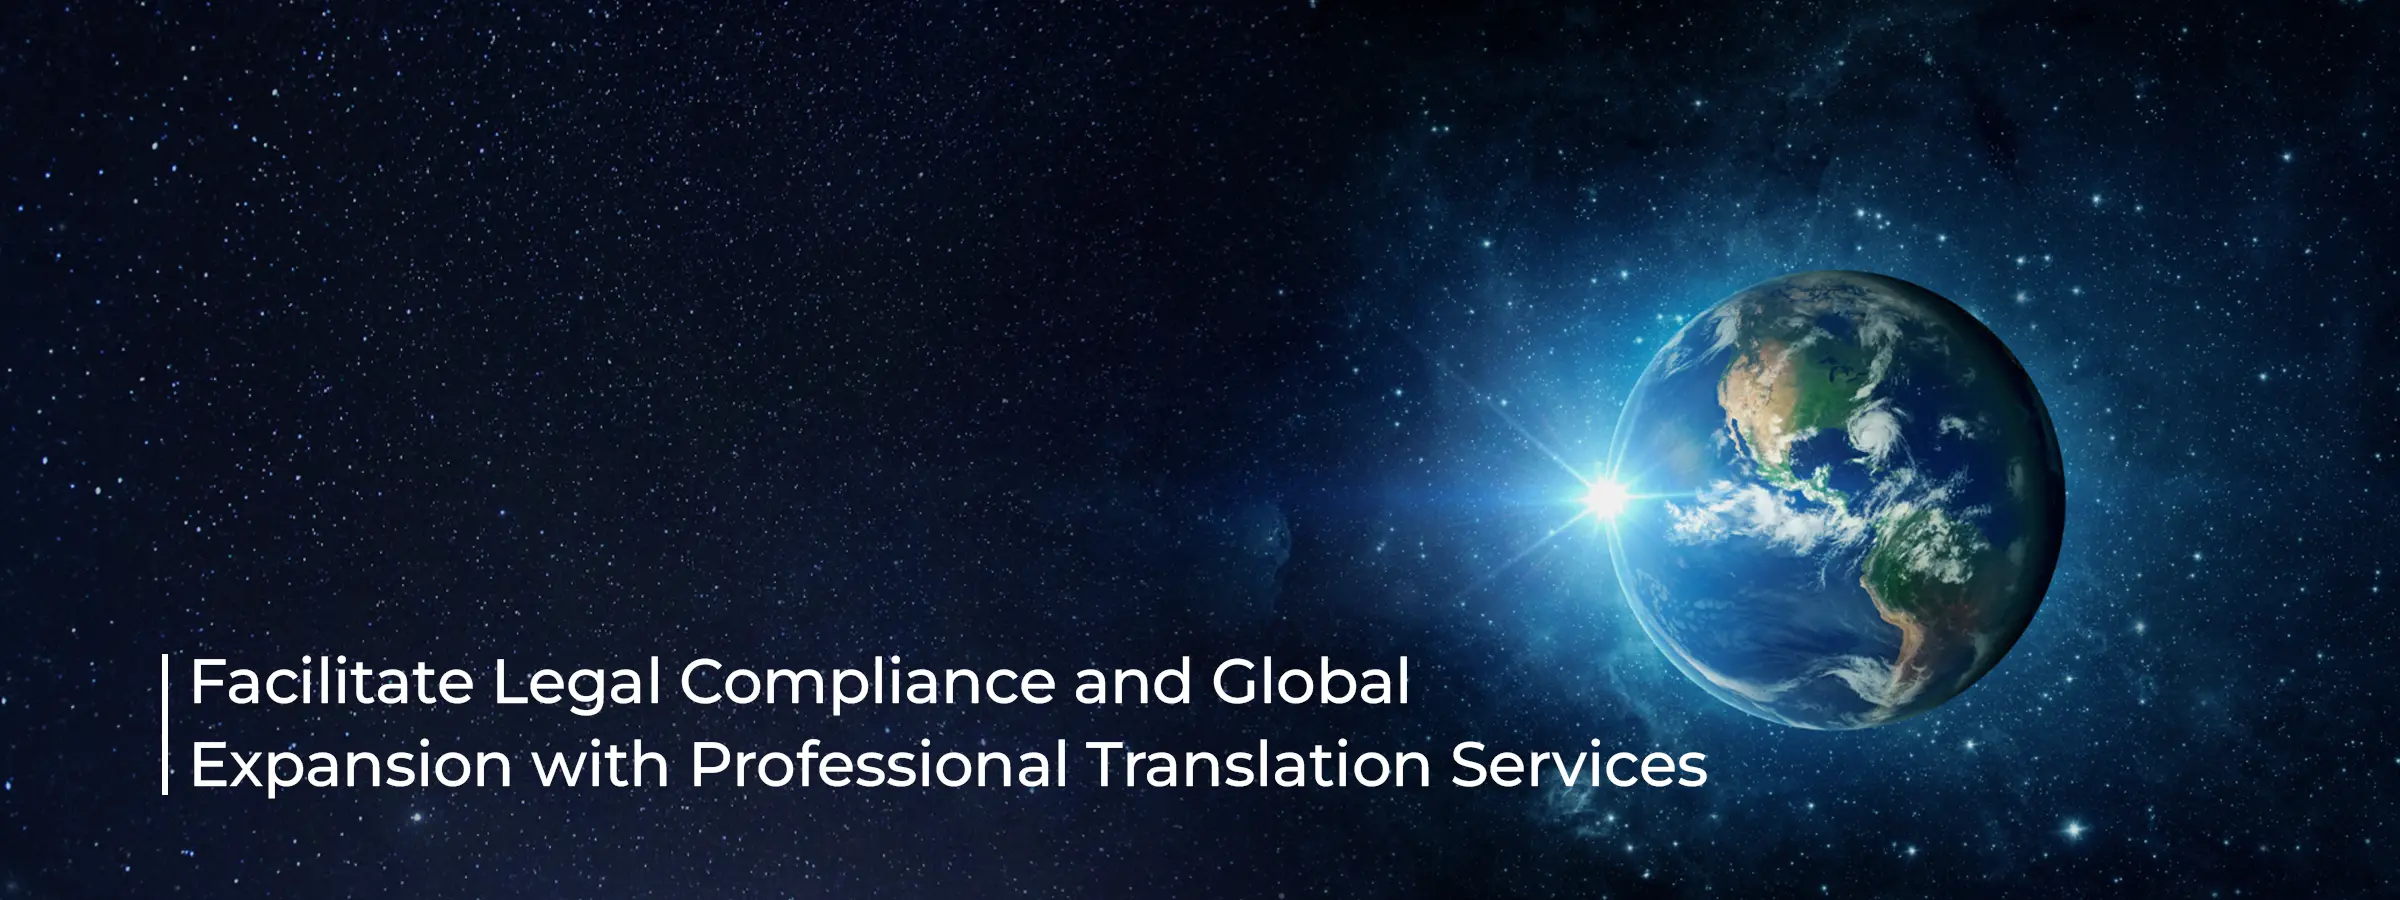 facilitate-legal-compliance-and-global-expansion-with-professional-translation-services